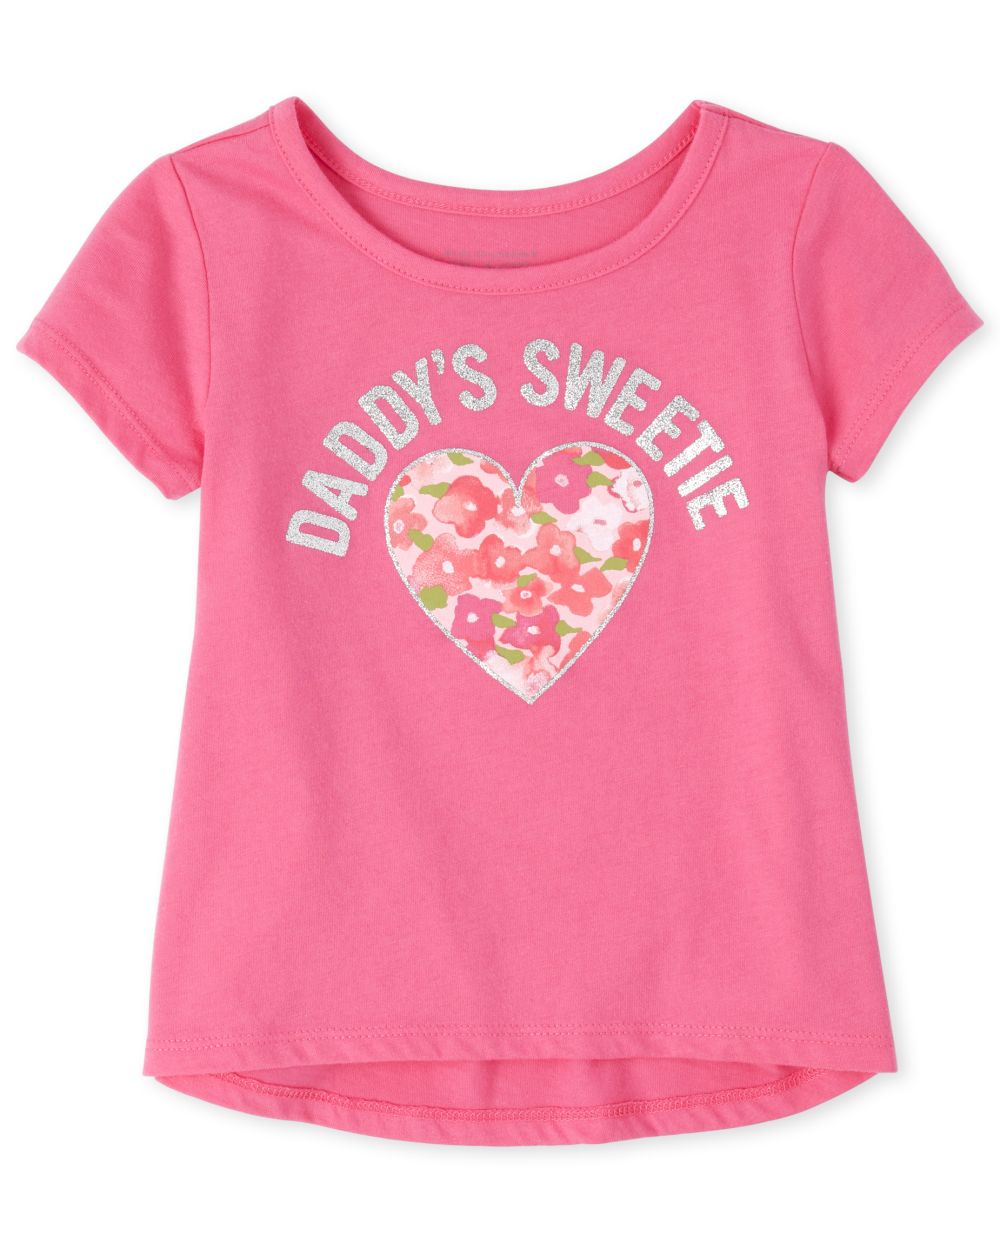 Baby And Toddler Girls Short Sleeve Glitter Graphic Top